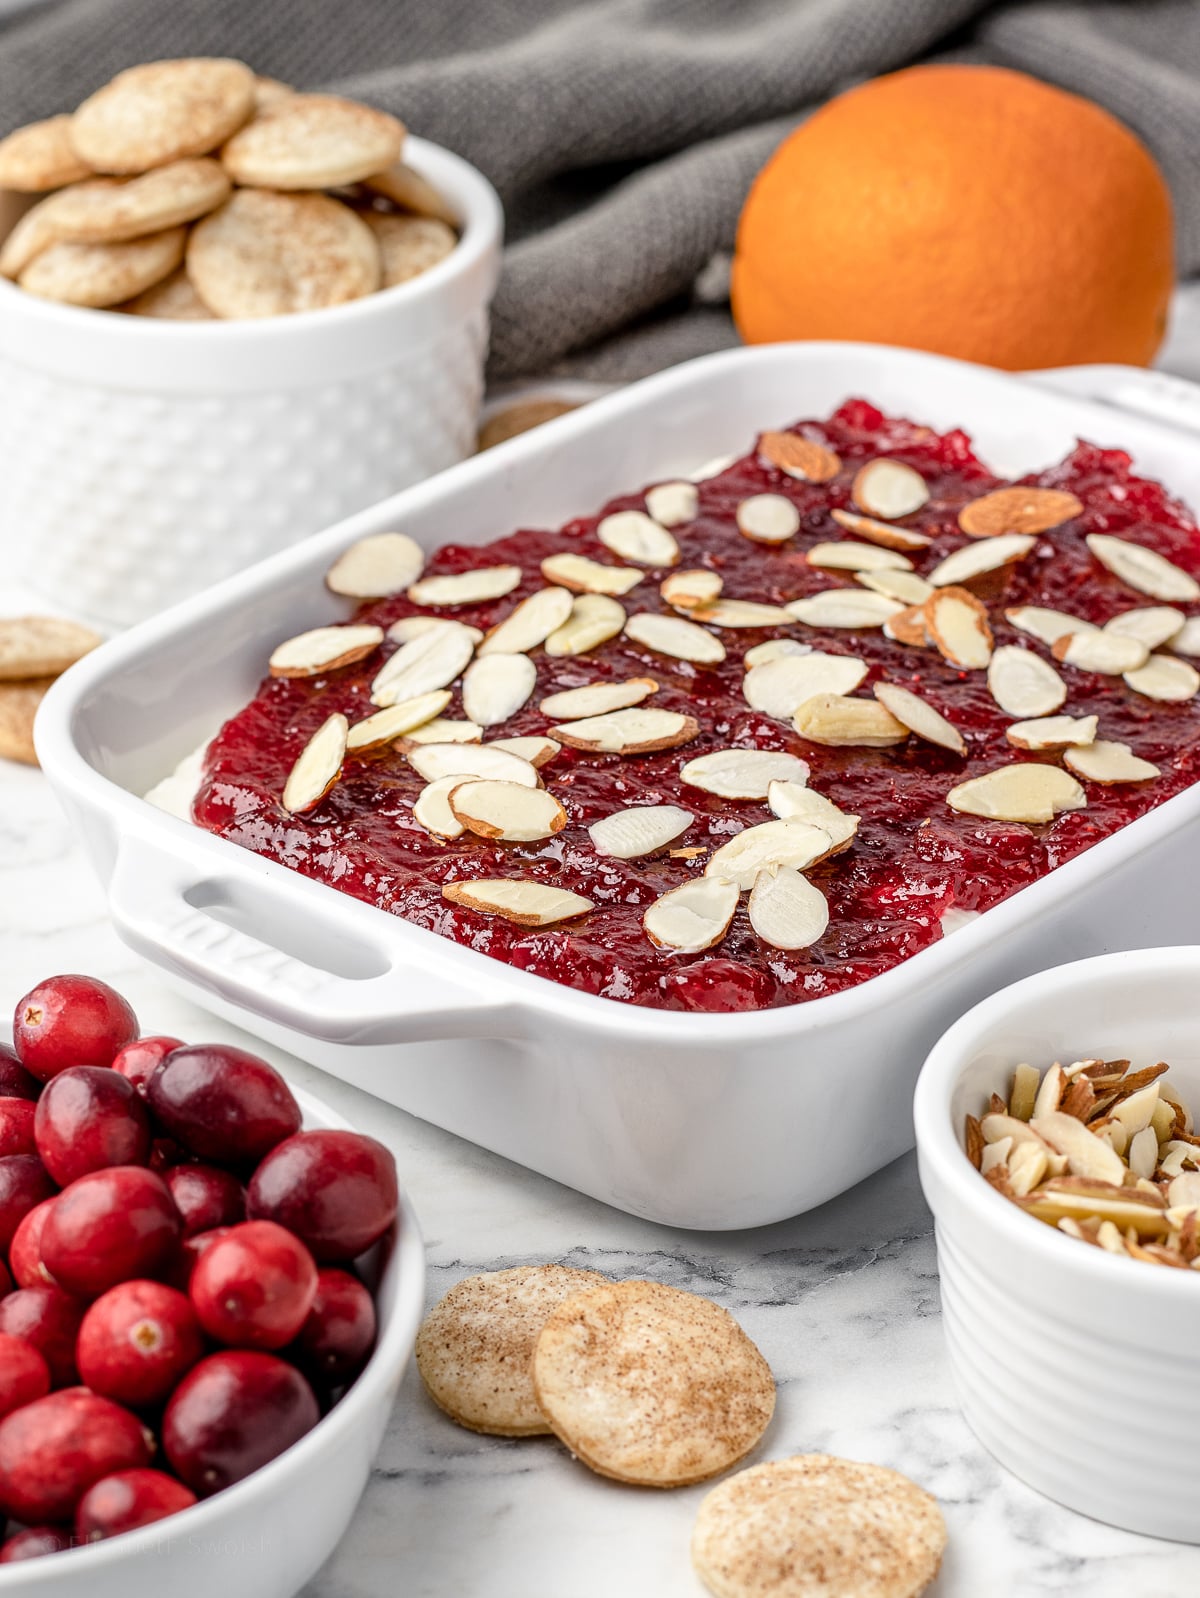 Pie Dip surrounded by Pie Crust Cookie Chips, fresh cranberries, an orange, and more slivered almonds.